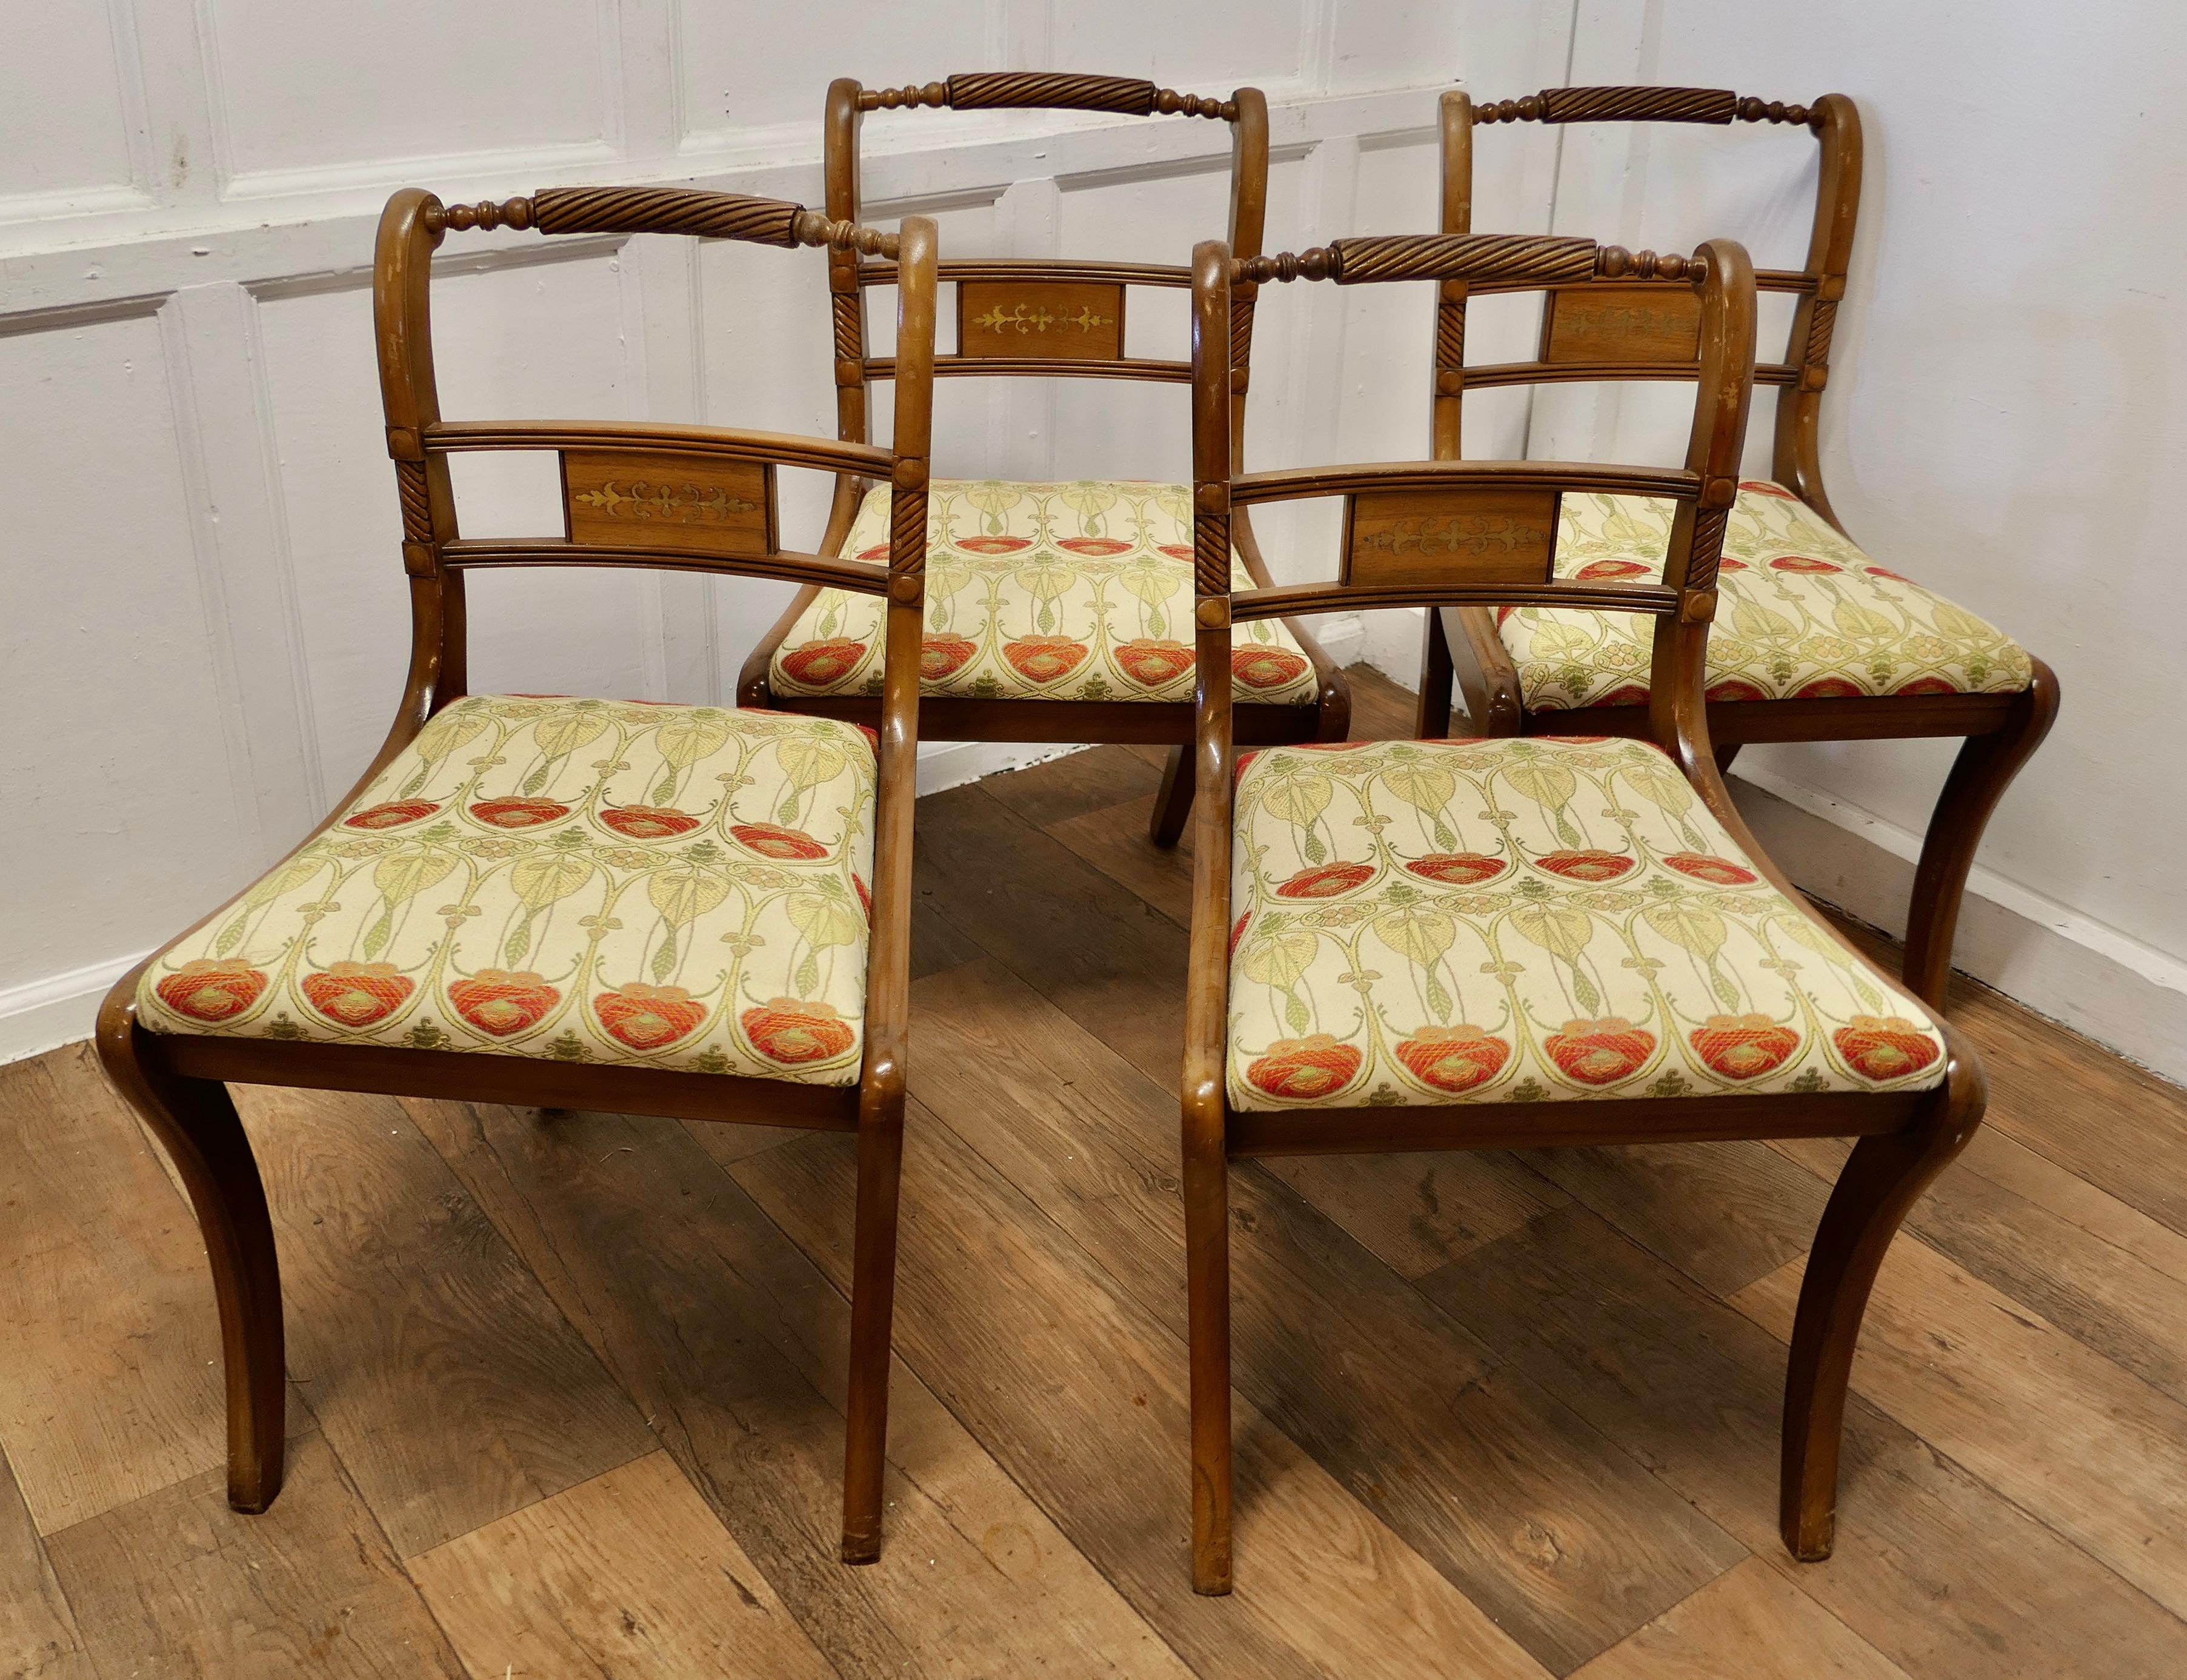 Set of 4 Art Nouveau Walnut Dining Chairs

An unusual set of chairs, the top rail of the chair backs are curved and twisted, the back panel is inlaid with brass

The Chairs are Good and Stylish they have sabre legs and trafalgar style seats and have